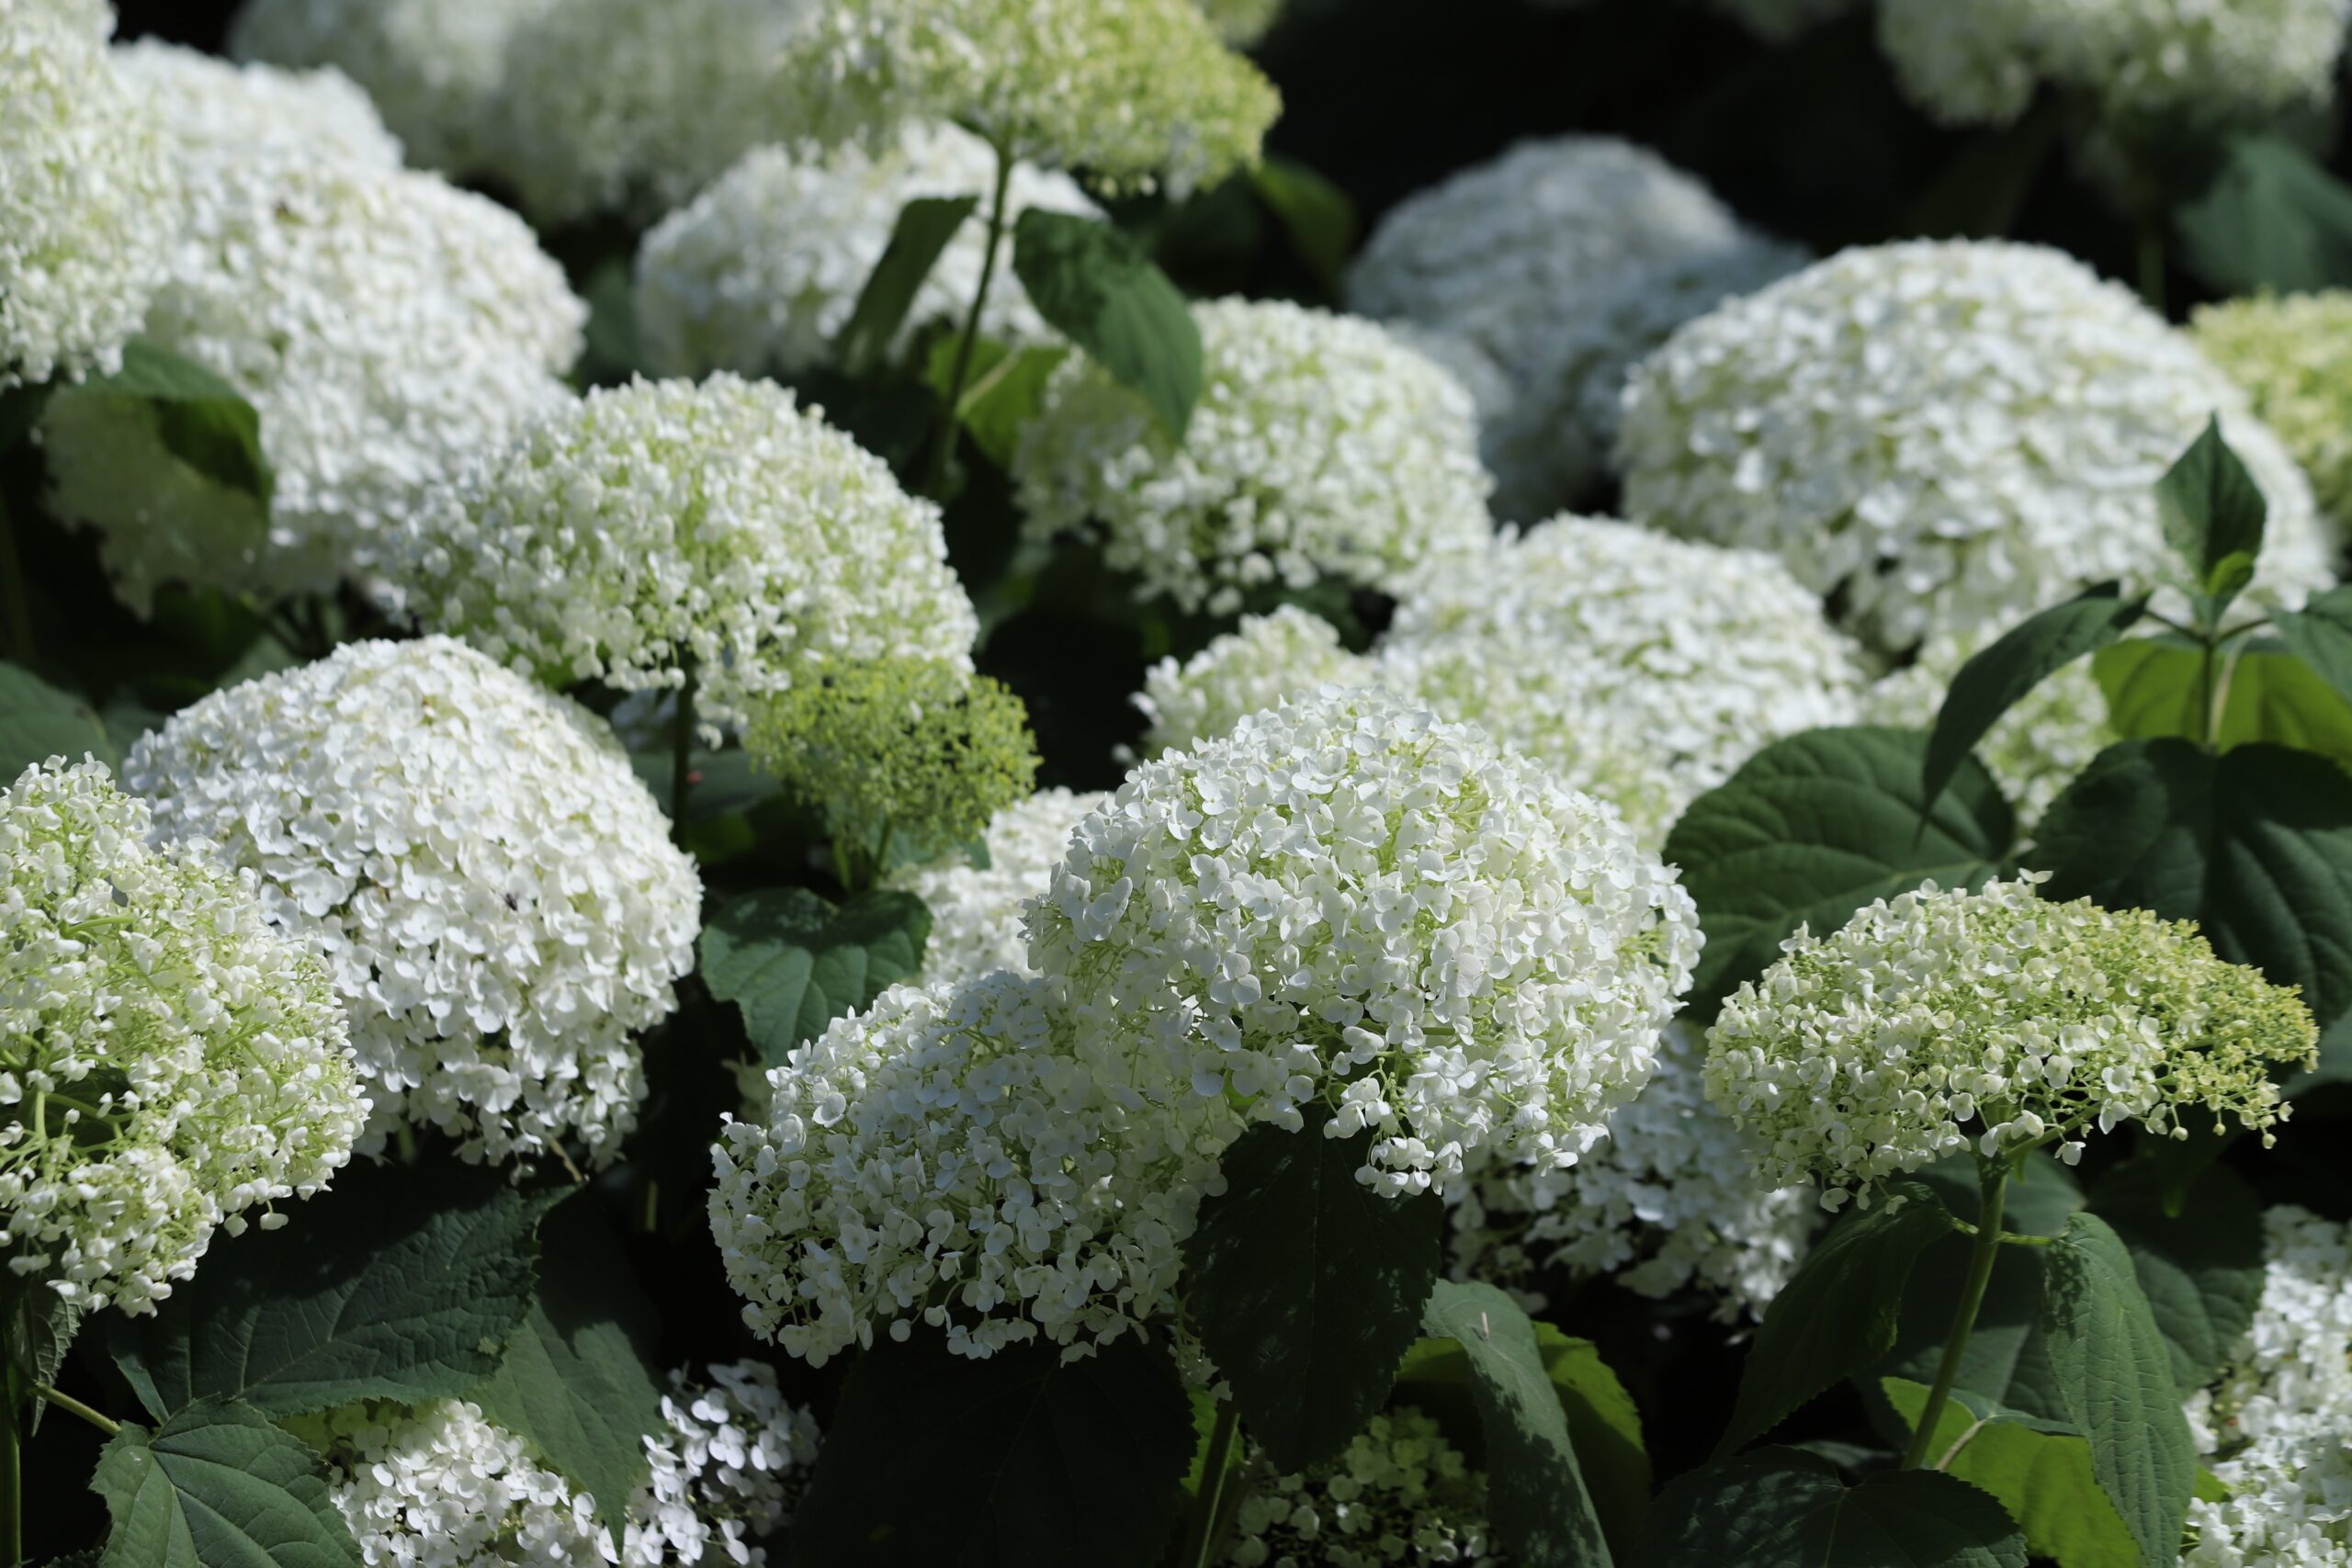 Clusters of spherical white flowers.